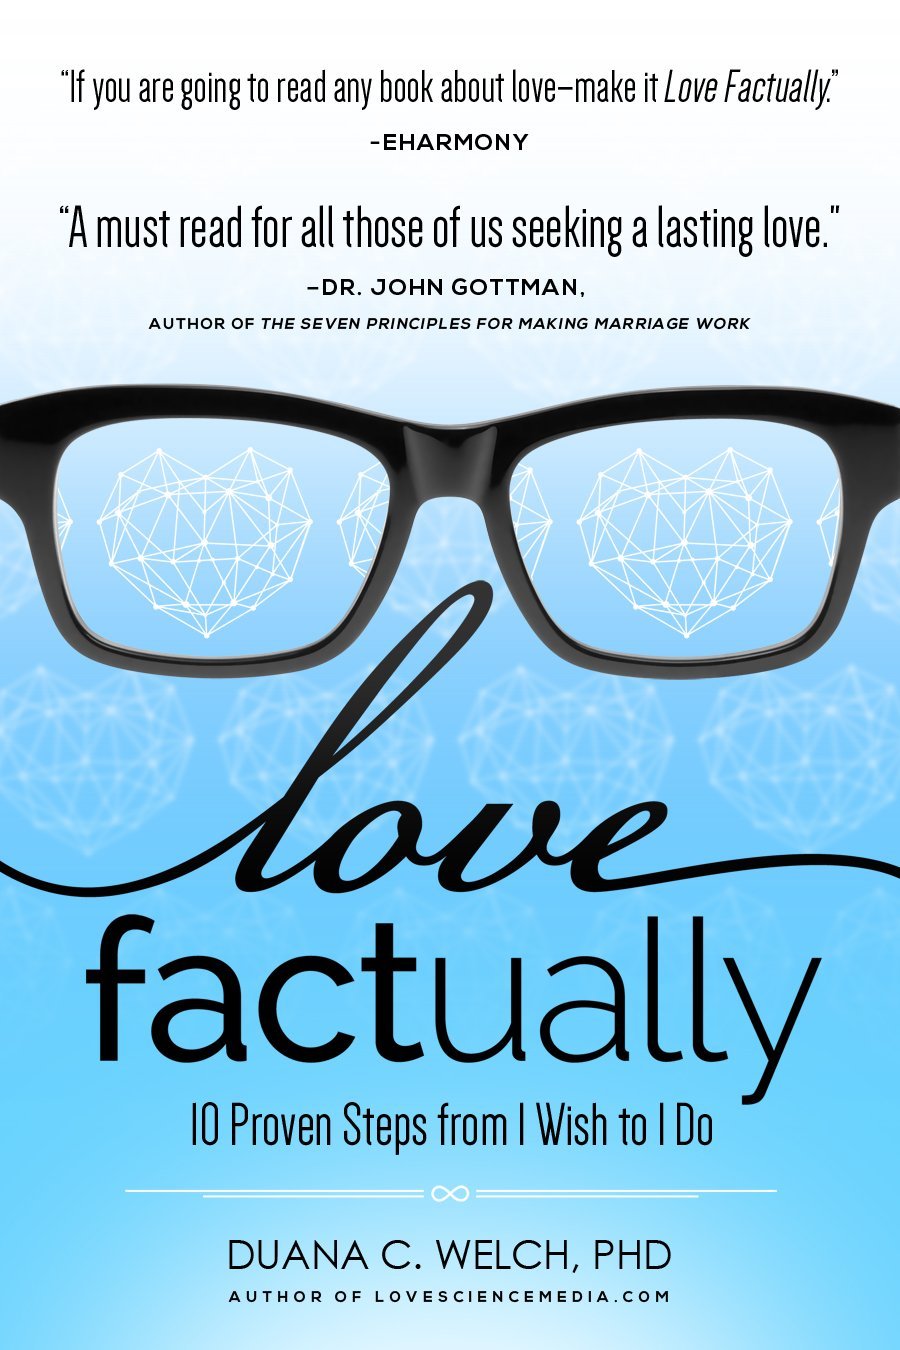 Book cover, love factually by Duana Welch.